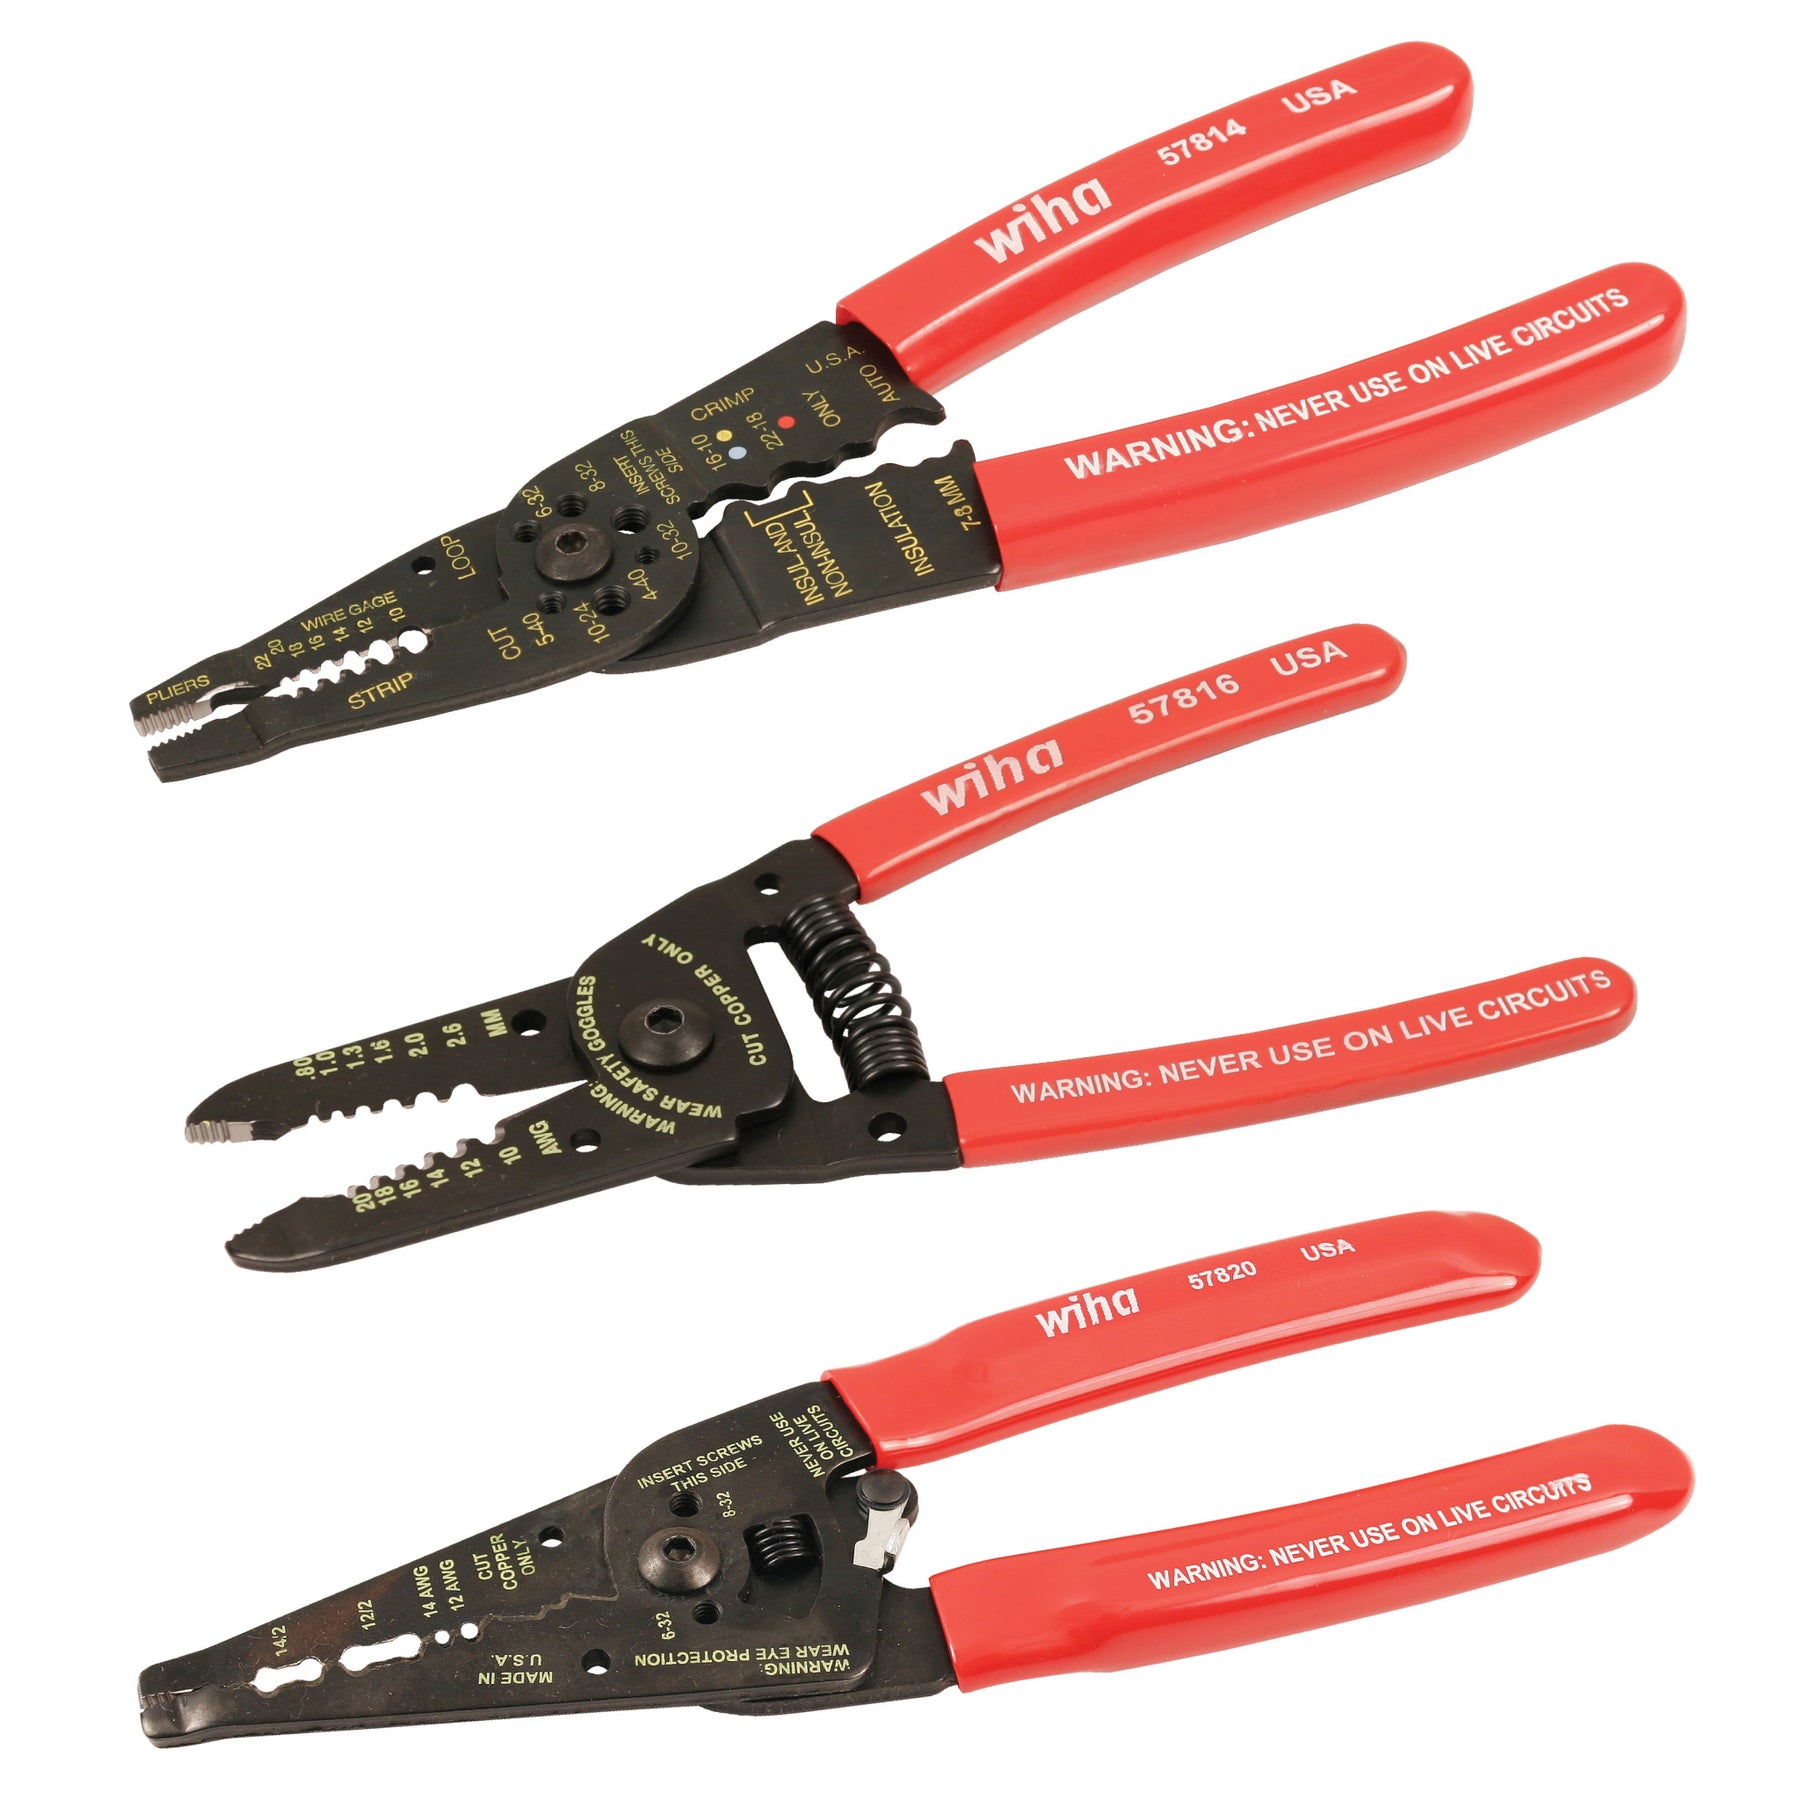 Wiha 57830 3 Piece Classic Grip Wire Strippers and Pliers Set